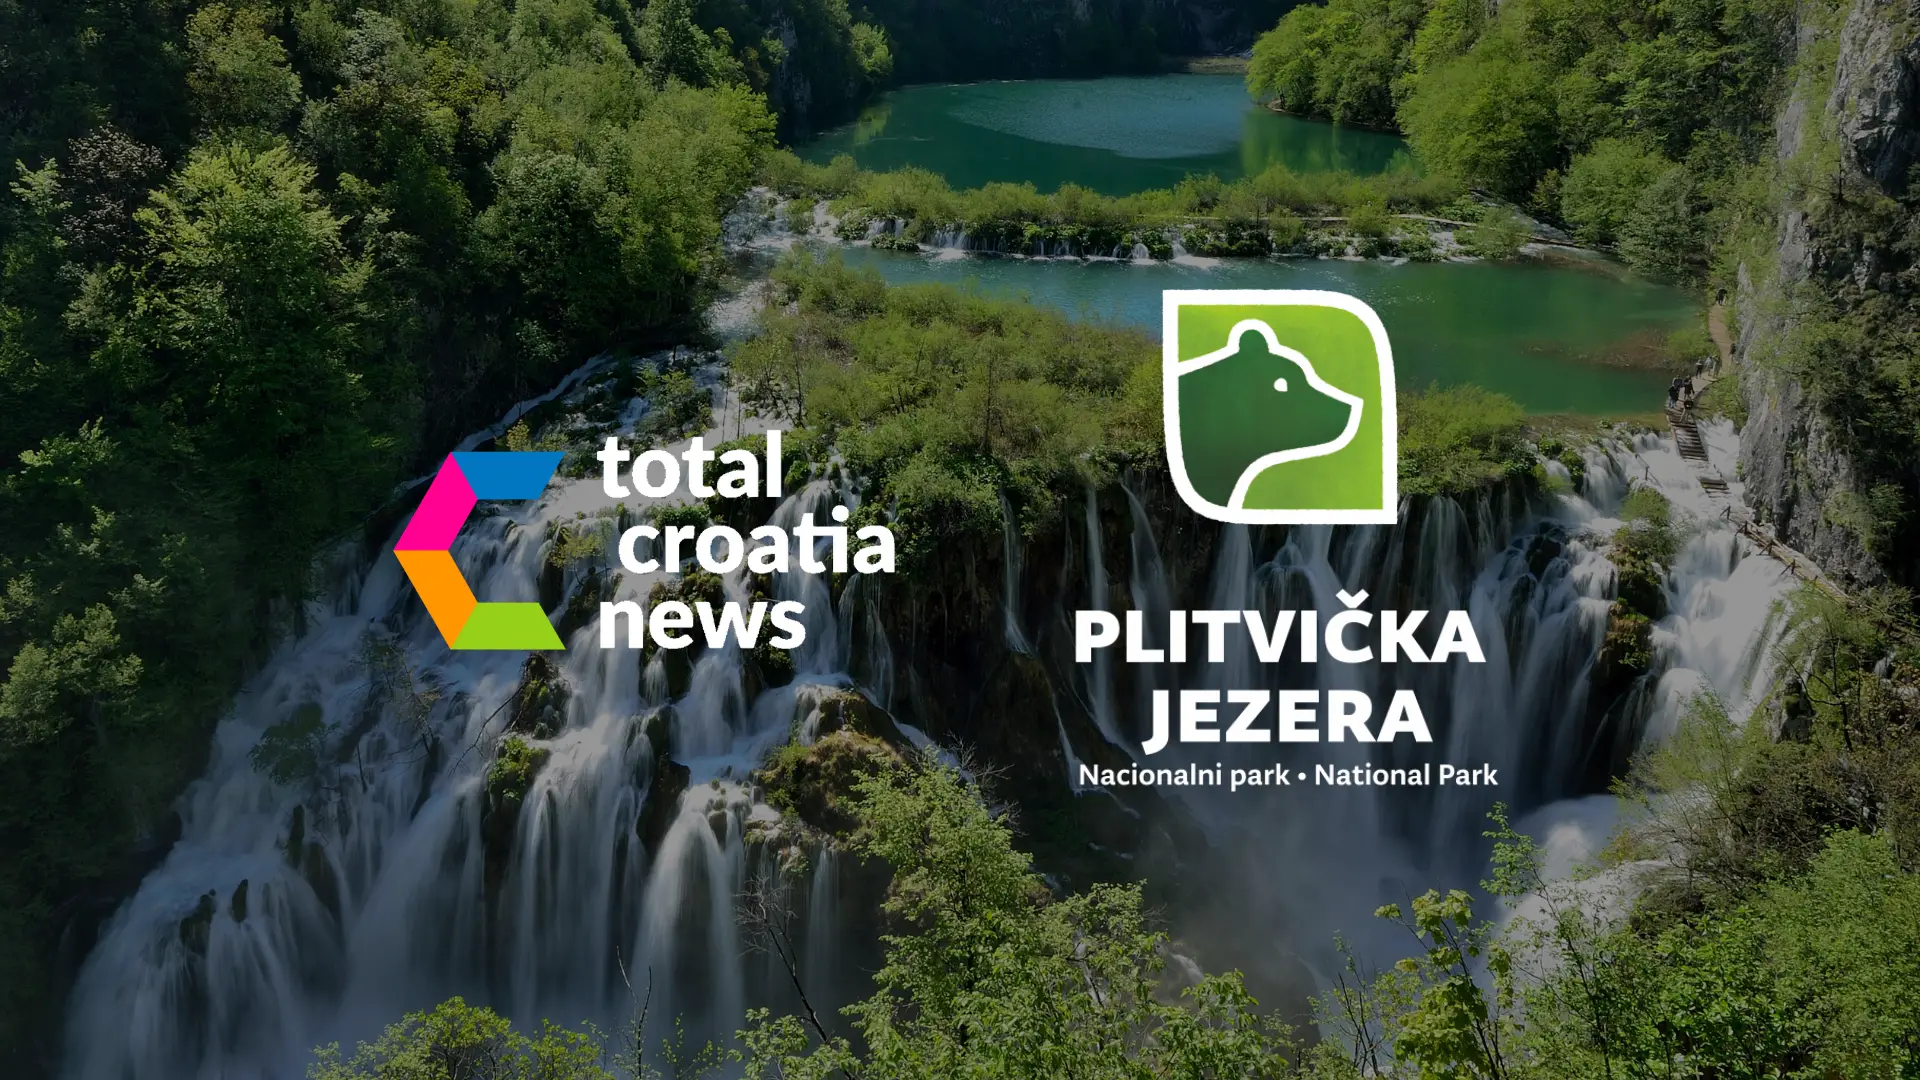 Photo by: Plitvice Lakes National Park